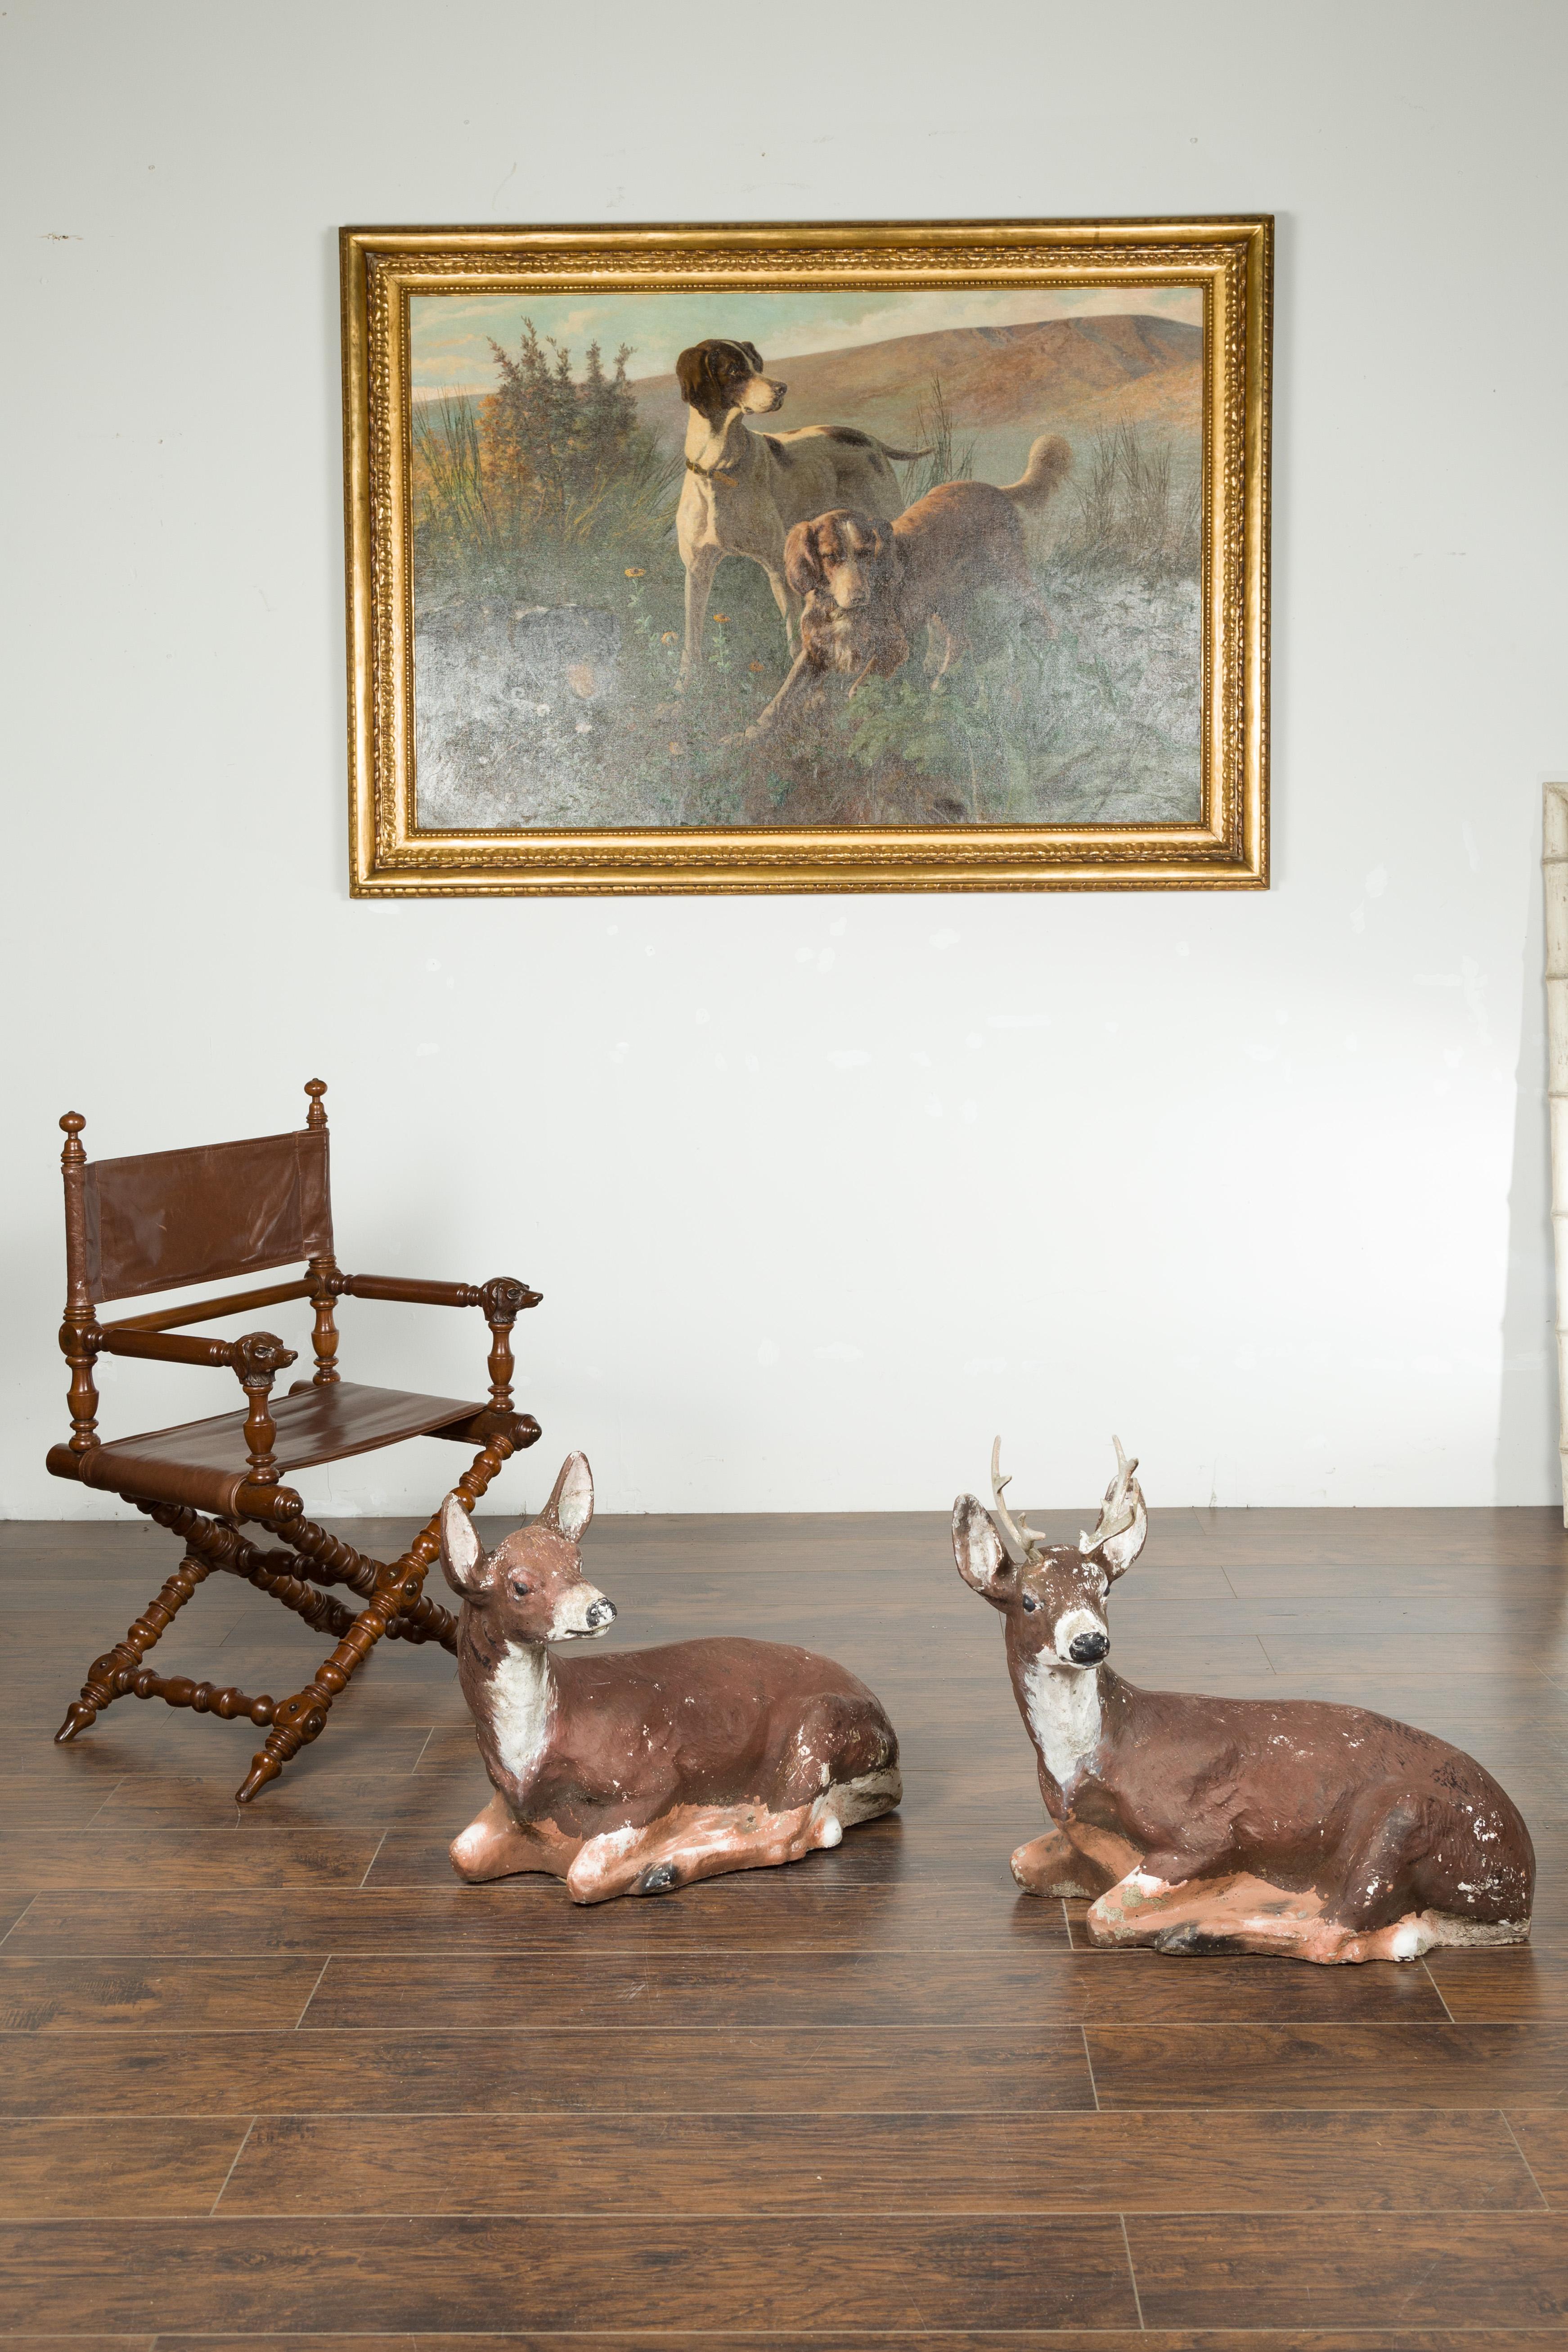 A pair of American painted concrete deer sculptures from the mid 20th century, with weathered patina. Made in the USA during the midcentury period, this pair of sculptures features a stag and a doe reclining peacefully. Turning their heads to the